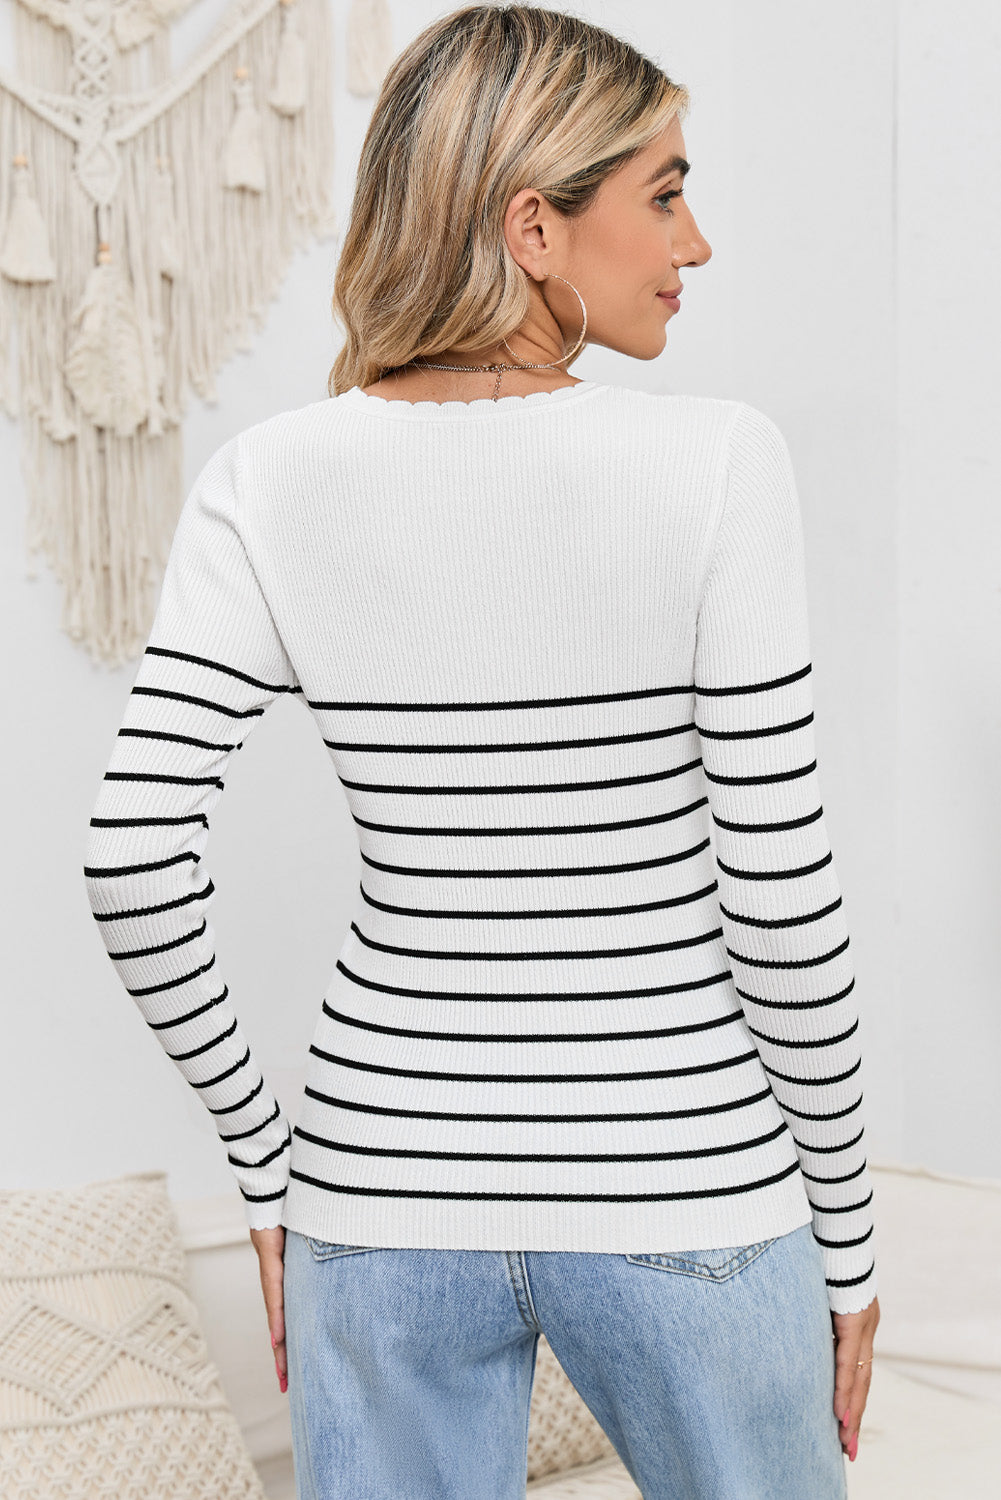 POSHOOT  AUTUMN OUTFITS    Striped Round Neck Long Sleeve Knit Top